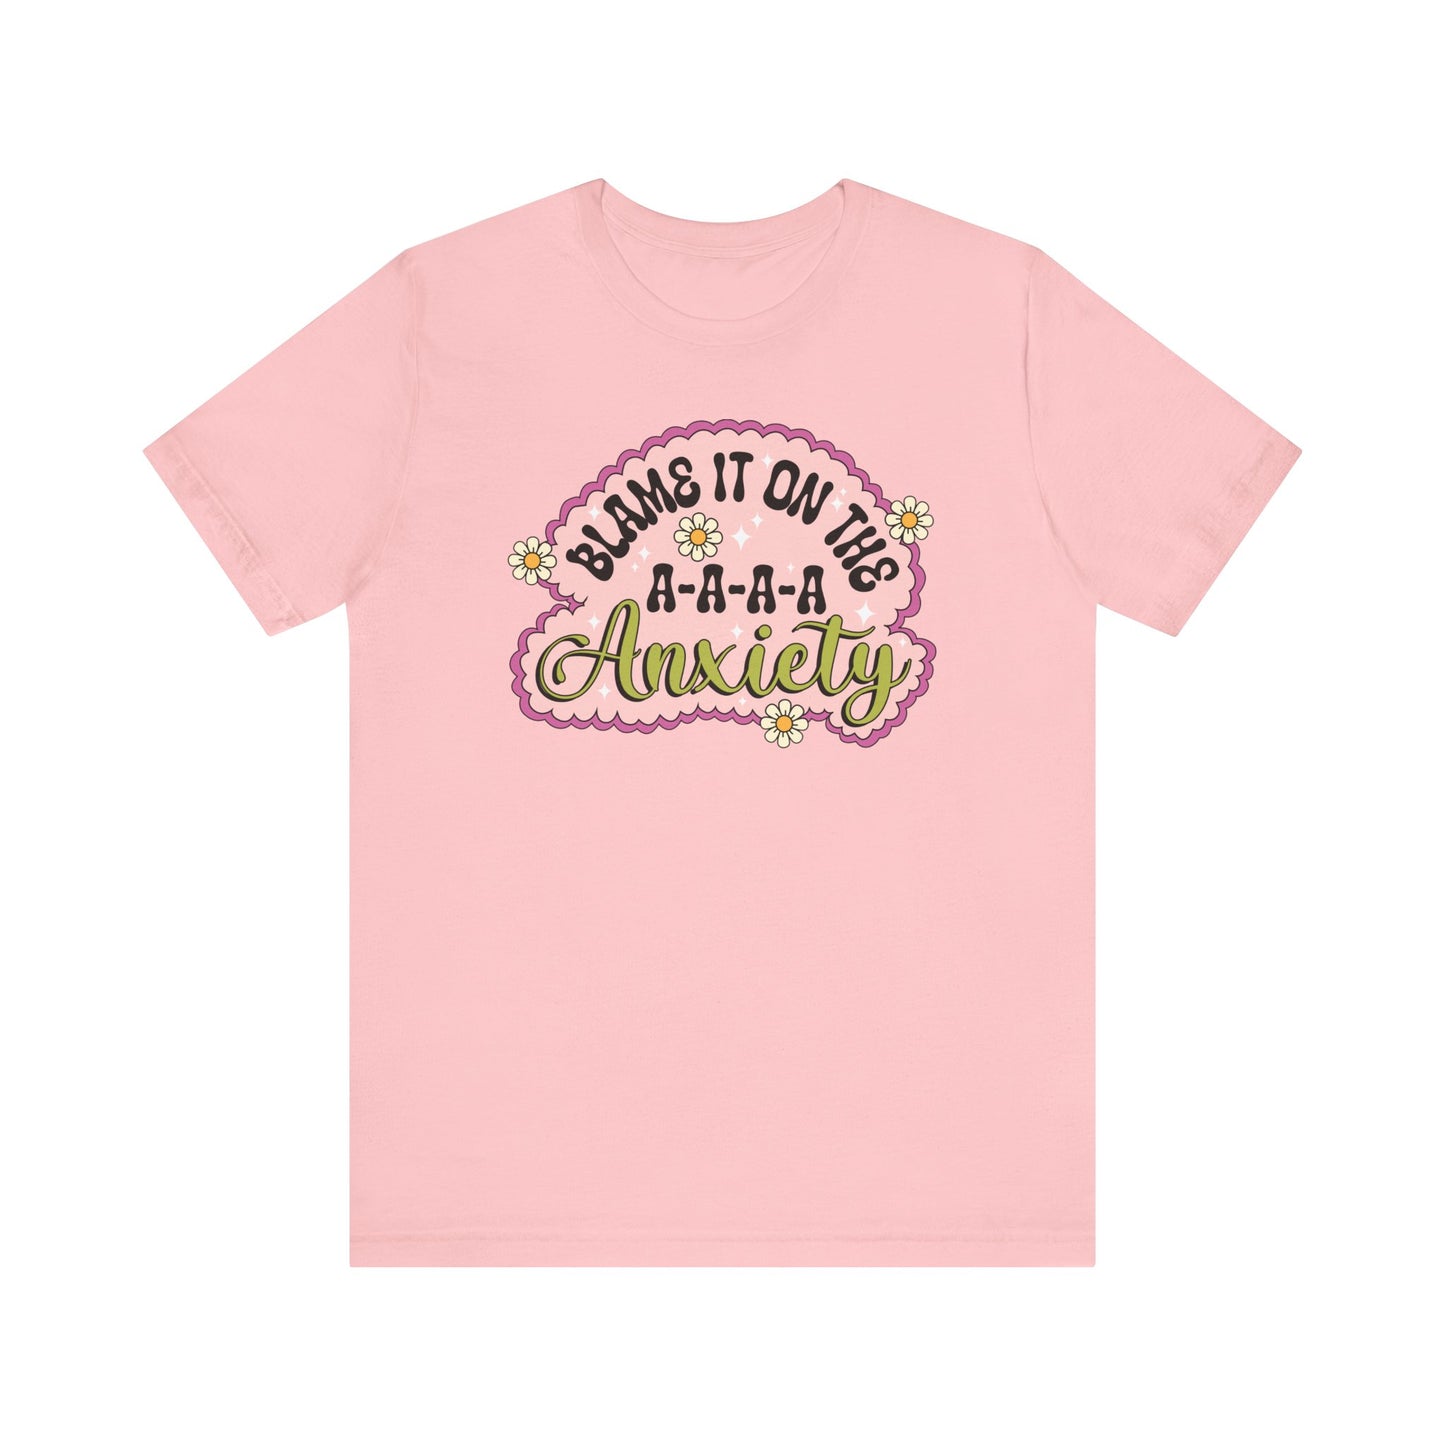 Funny Anxiety T-Shirt, Blame It On The Anxiety Quote Tee, Floral Print Unisex Top, Casual Mental Health Awareness Shirt, Unisex Top